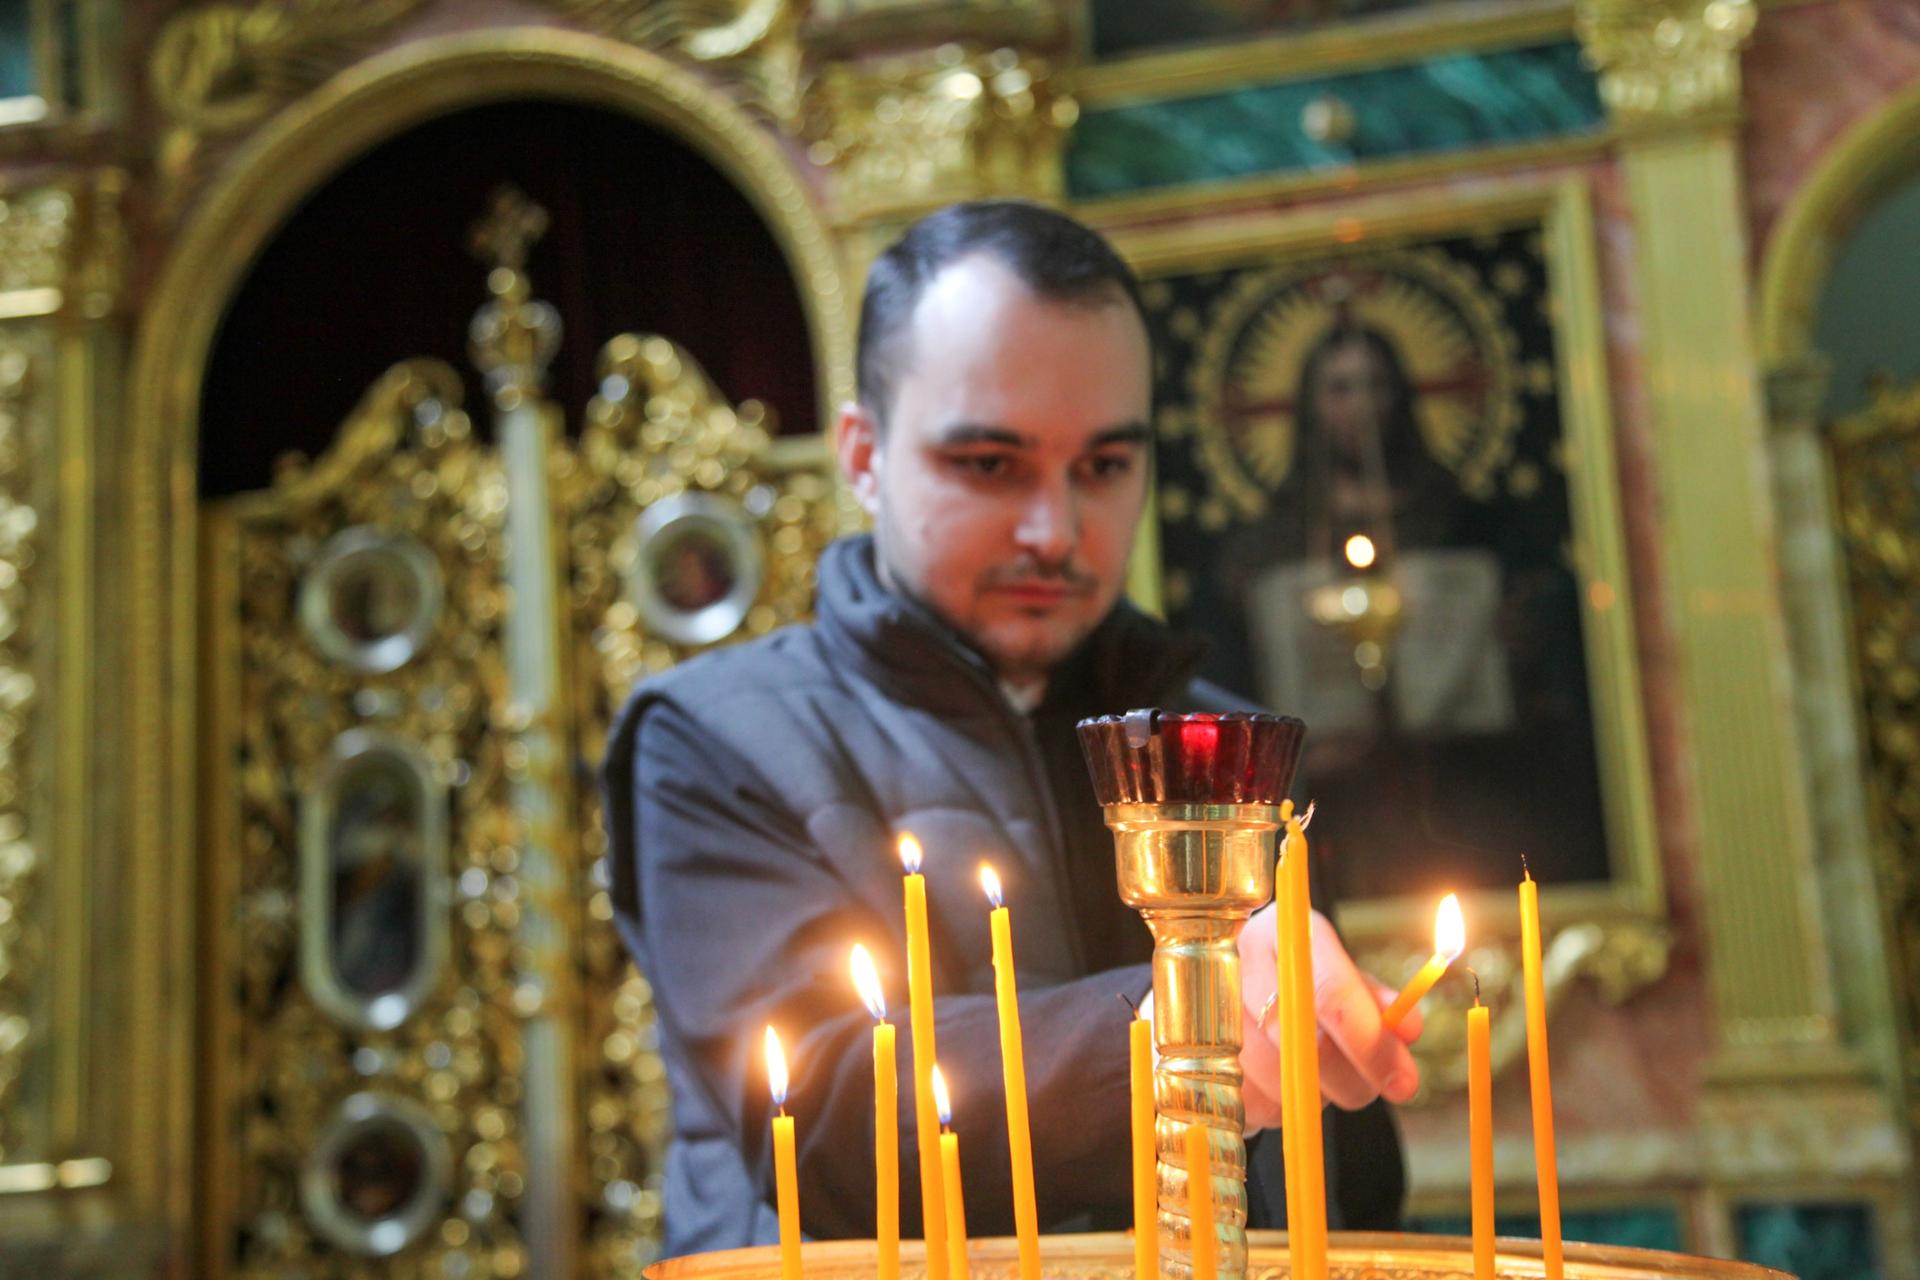 Father Dmytro Fedlyuk lights candles before a christening at the Ukrainian Catholic church in Krakow, Poland.